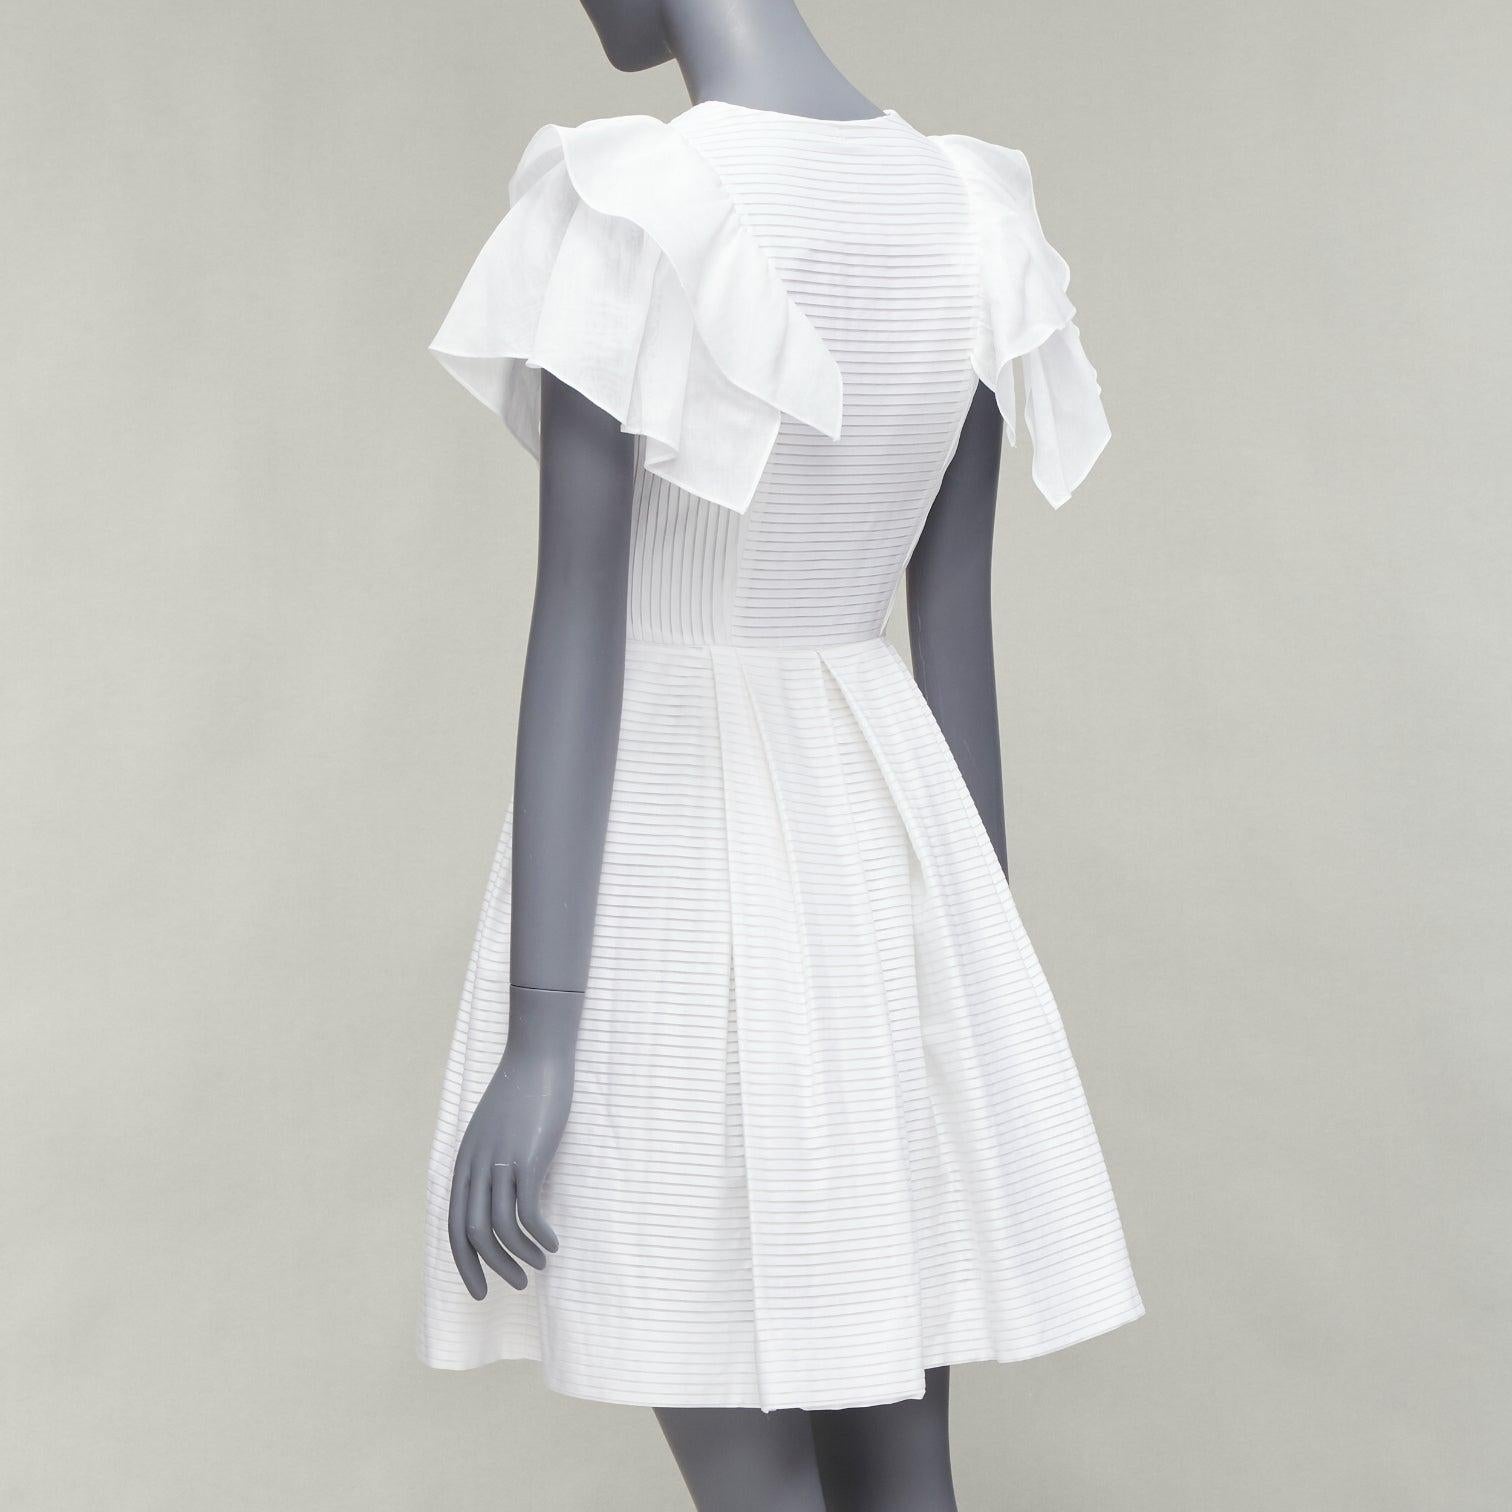 DICE KAYEK white pleated cotton ruffle sleeve fit flared cocktail dress FR34 XS 2